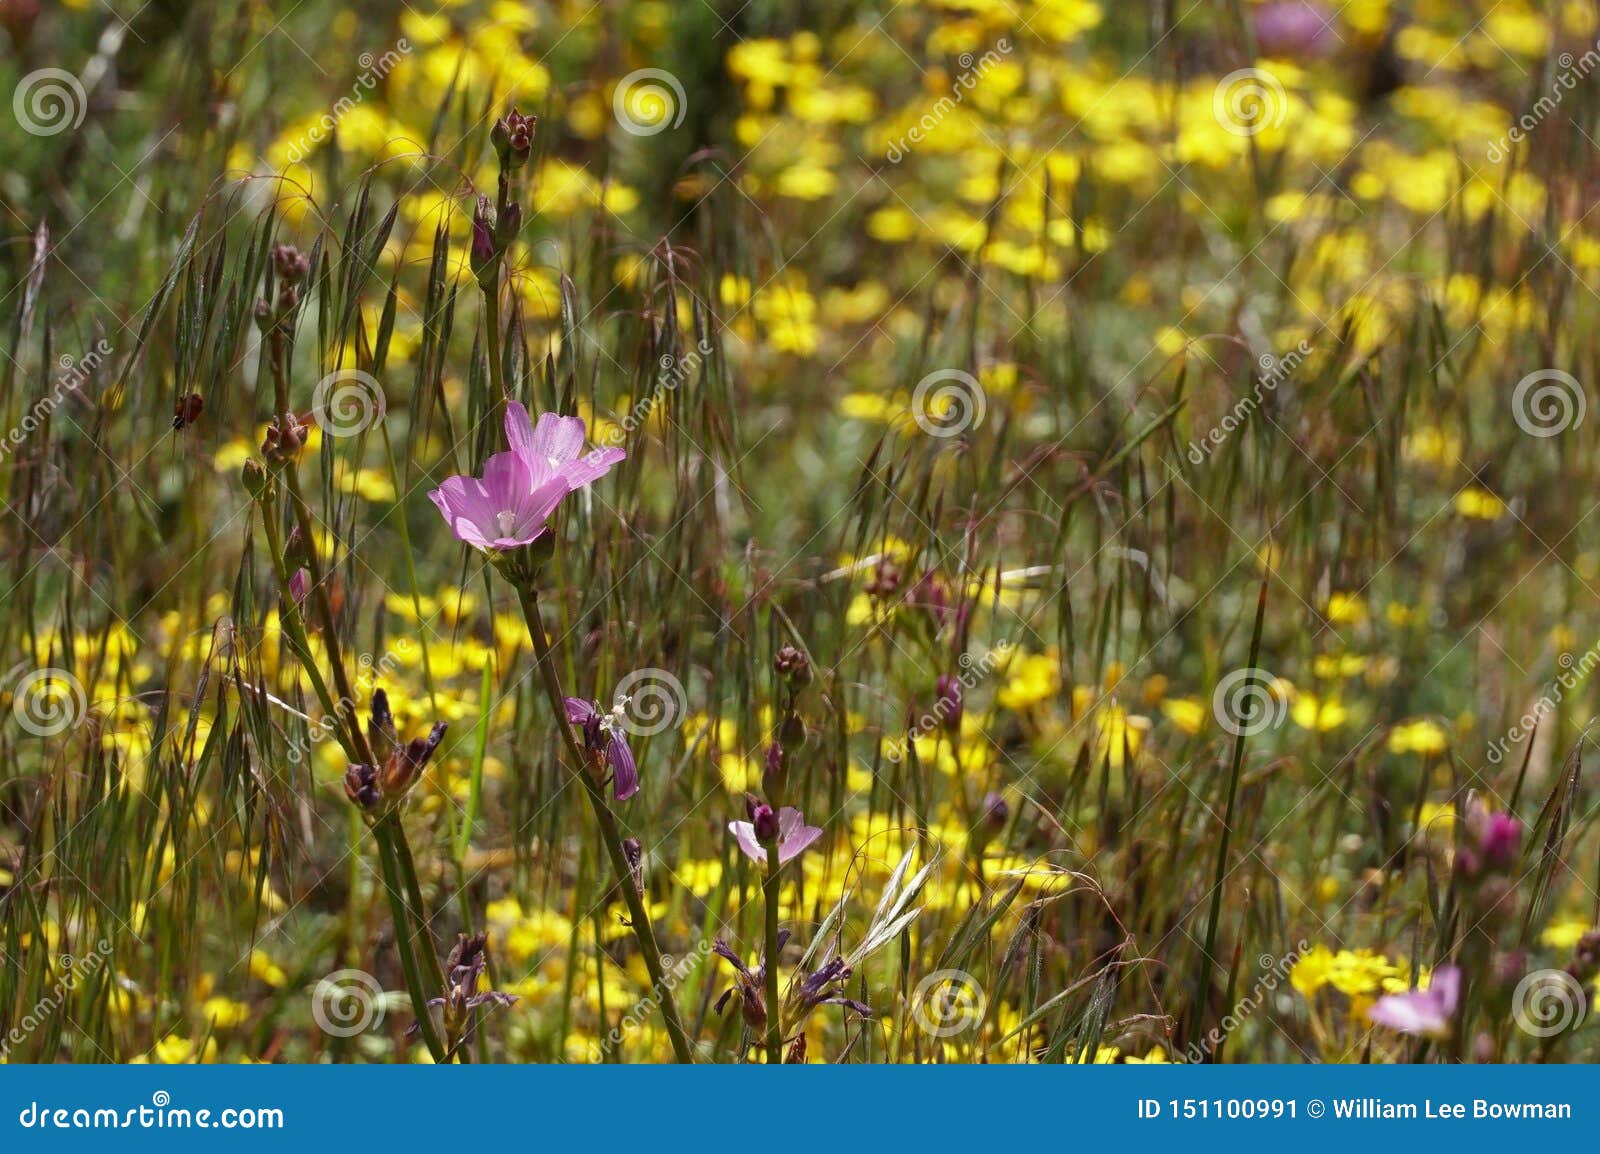 Pink Wildflower In A Field Of Yellow, Wide Stock Image ...